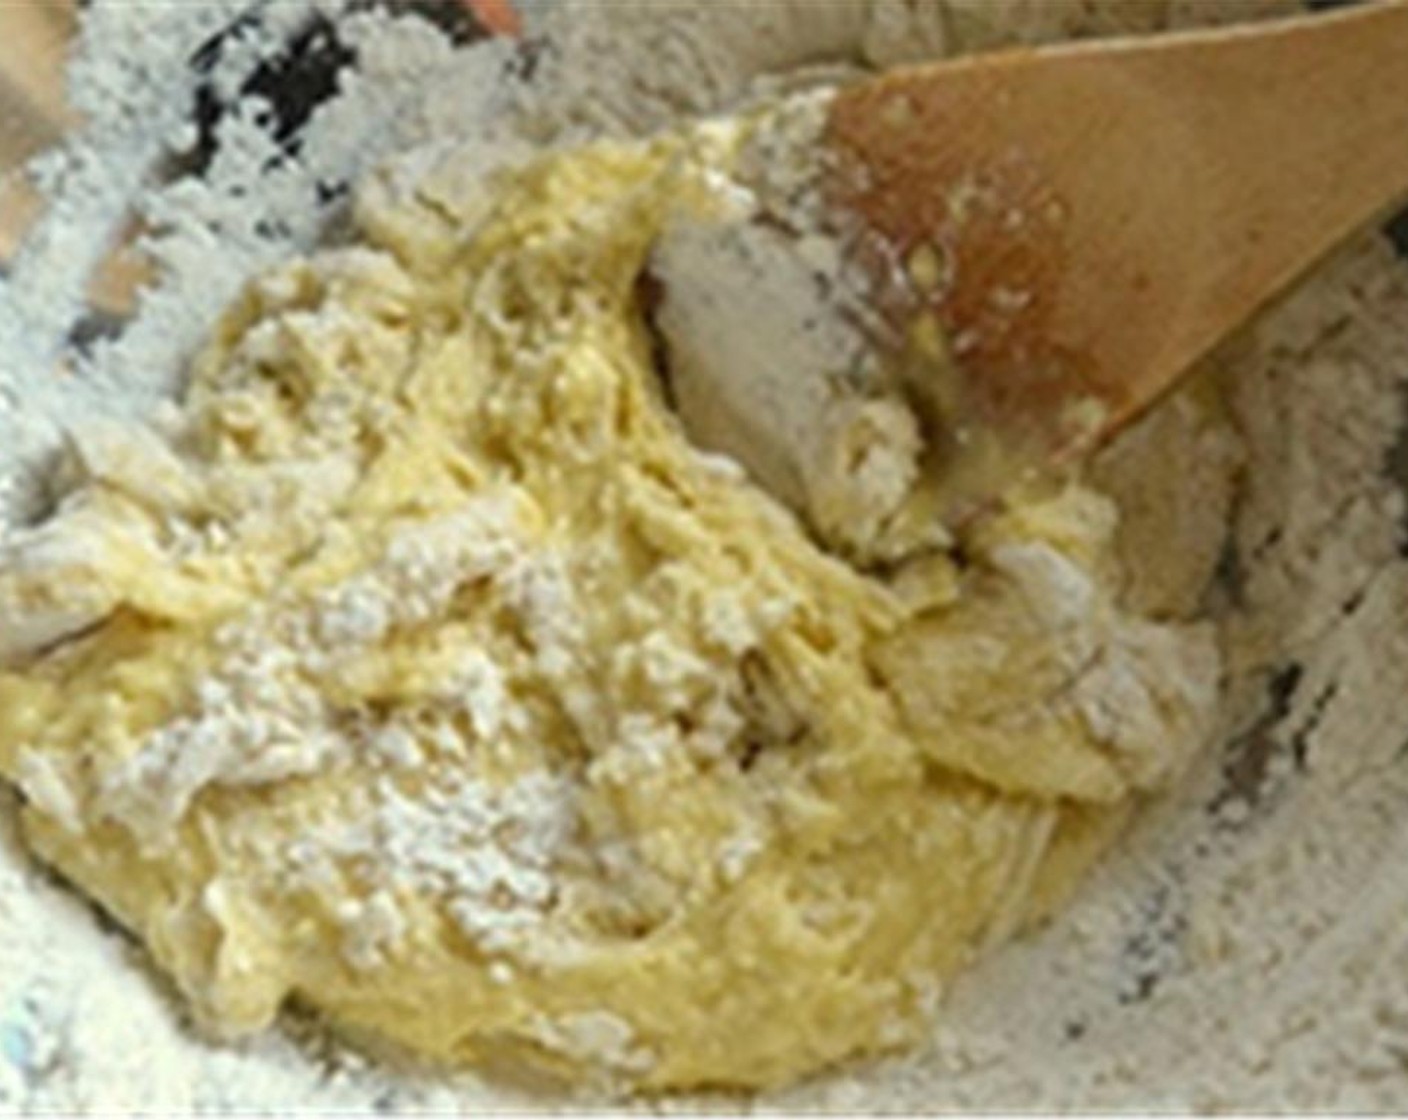 step 2 Gradually start mixing the wet and dry ingredients with a wooden spoon making sure the well stays intact. Just keep stirring in a circular motion, incorporating more and more flour into the egg until you get a soft, shaggy ball of dough.